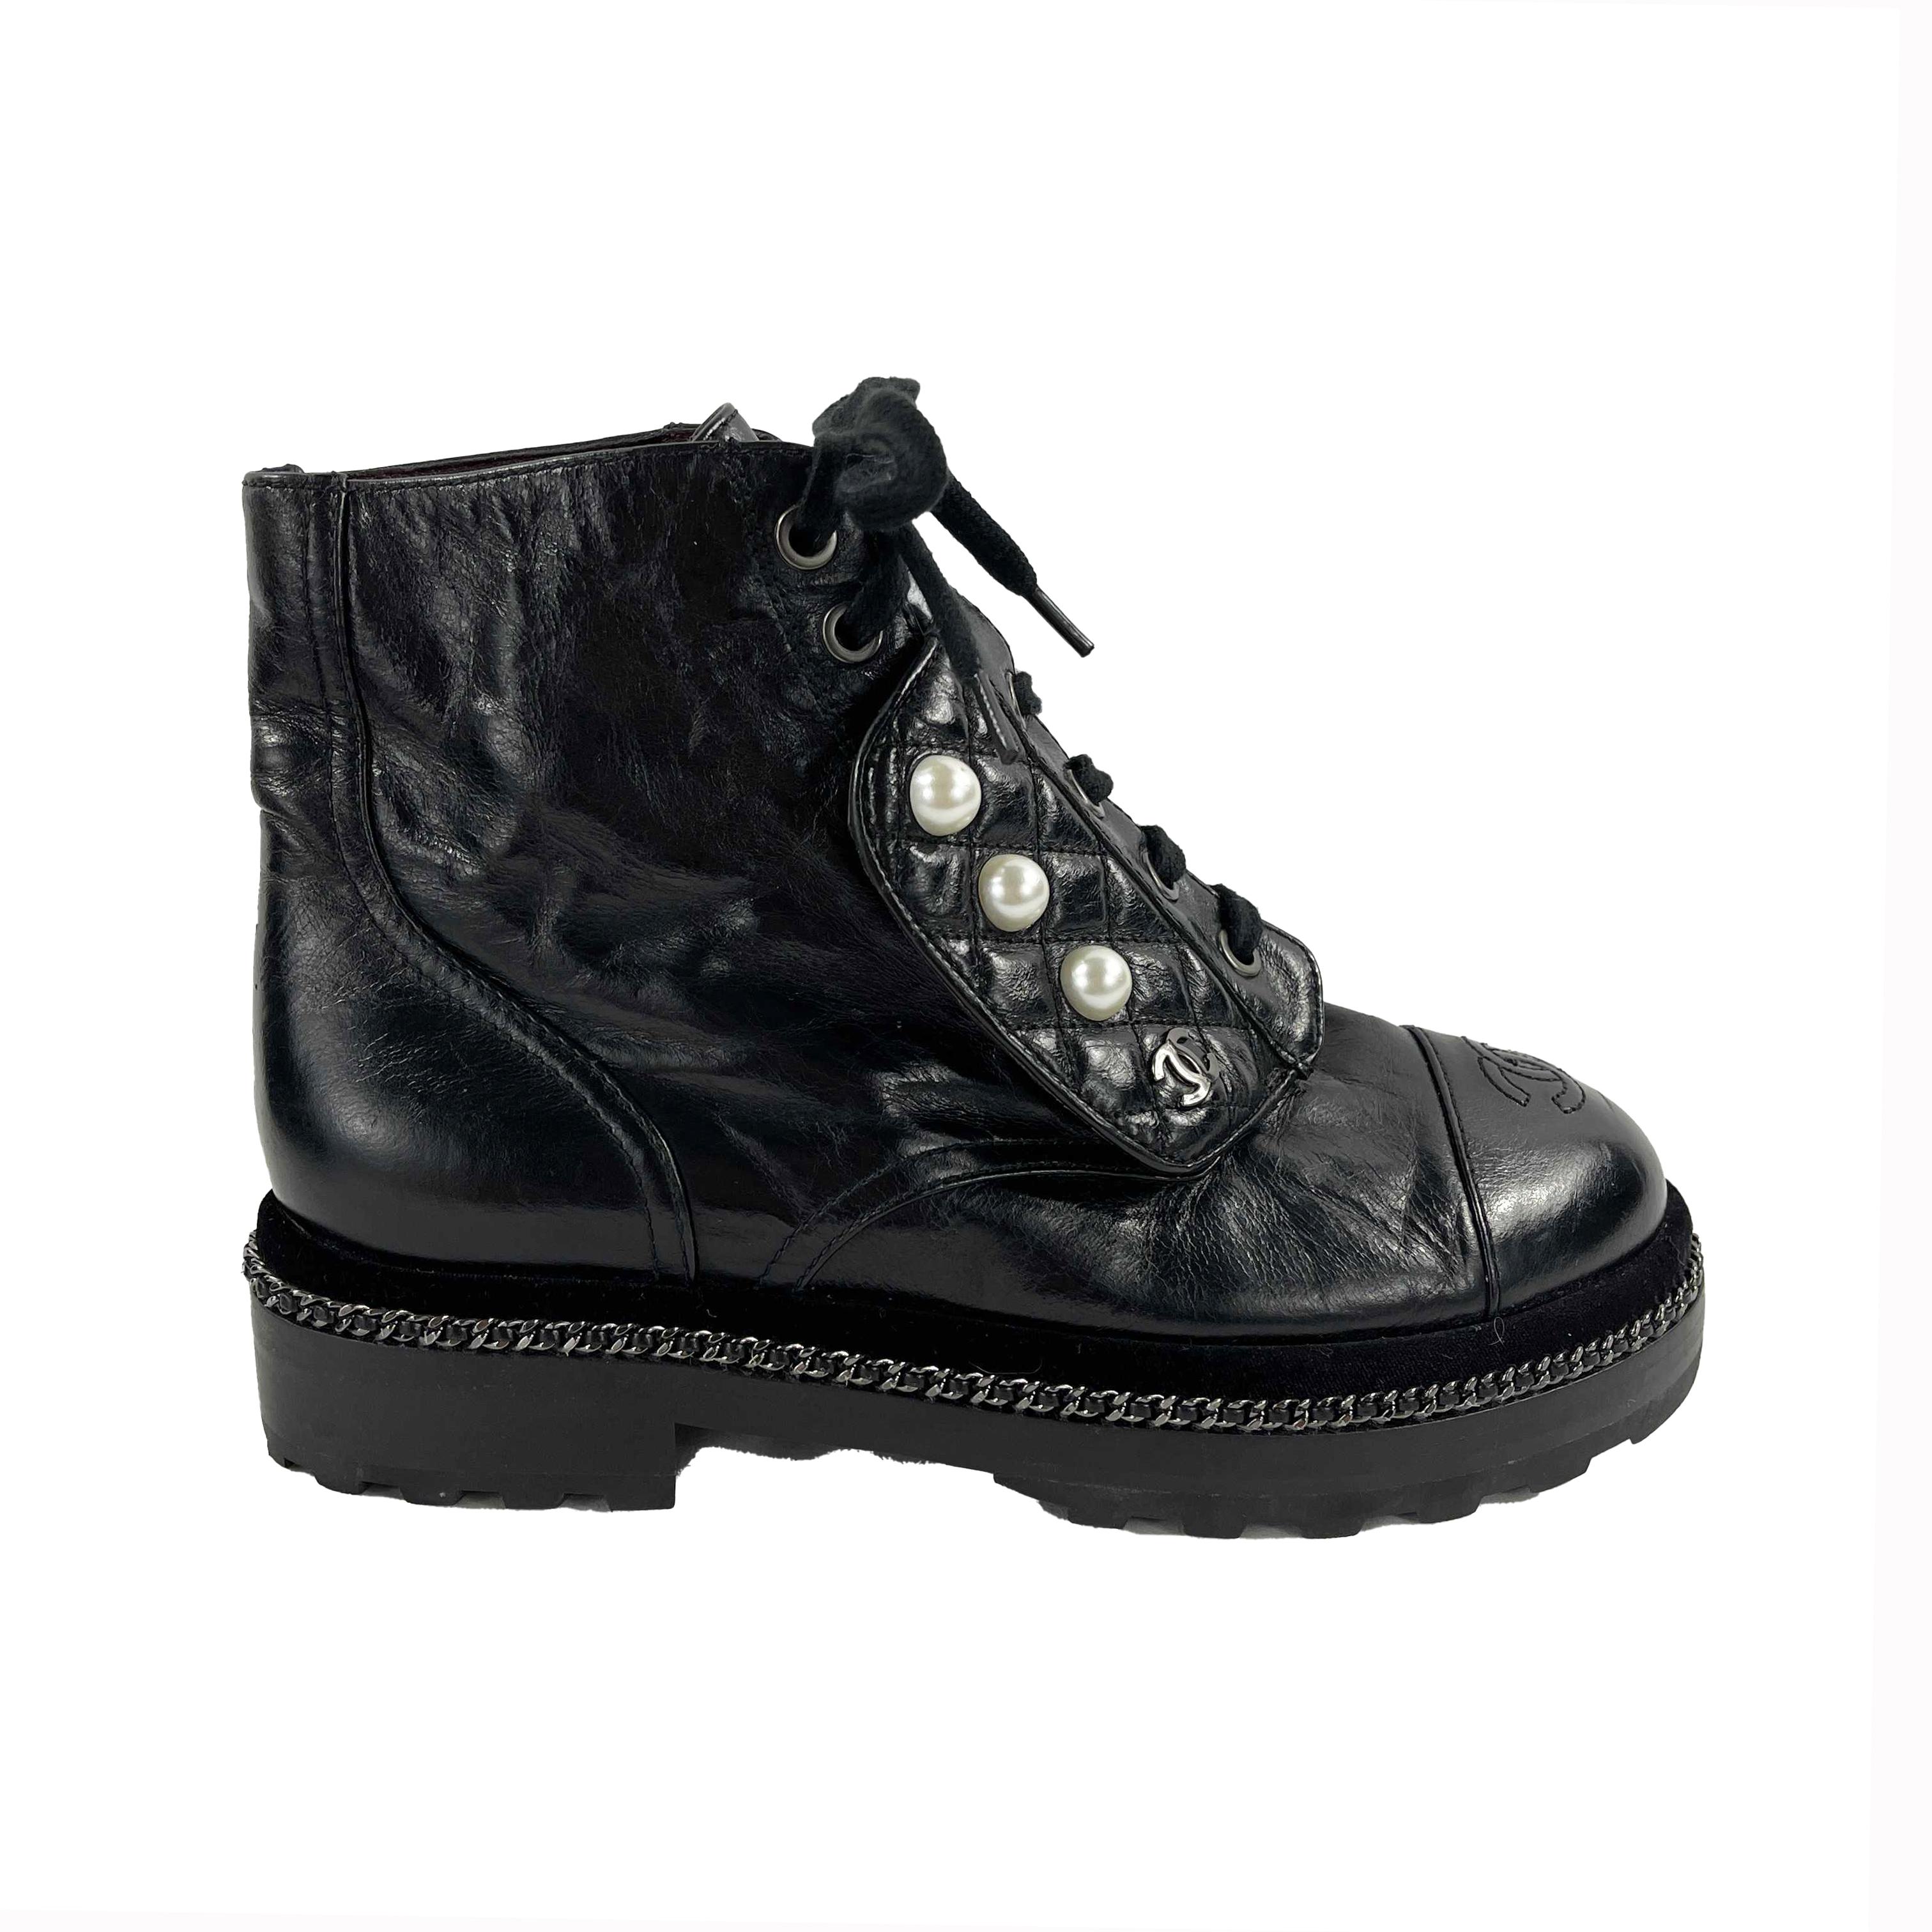 CHANEL Black Leather Combat Boots with Trim and Faux Pearl CC Details SZ 36- 6 3